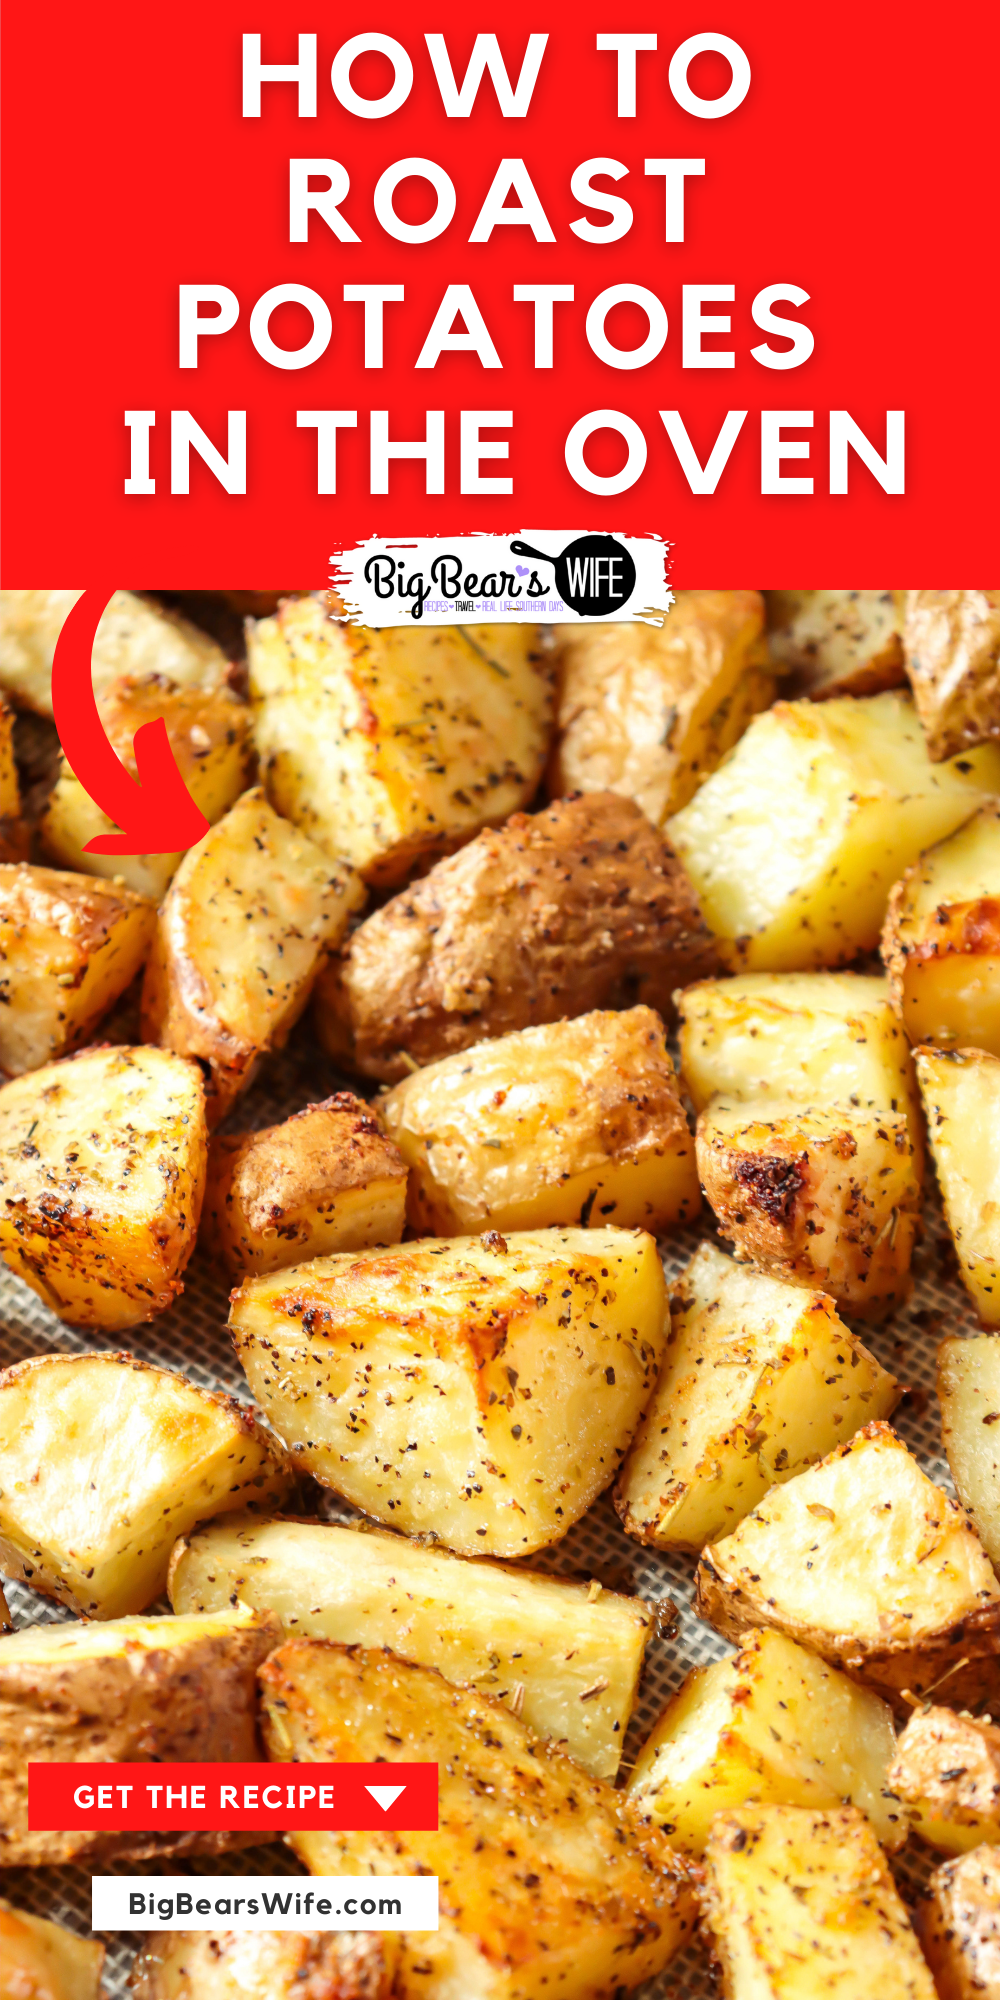 Roasted Potatoes are tender and delicious additions to any meals or recipe! Learn How To Roast Potatoes in the Oven and serve them with dinner this week! via @bigbearswife